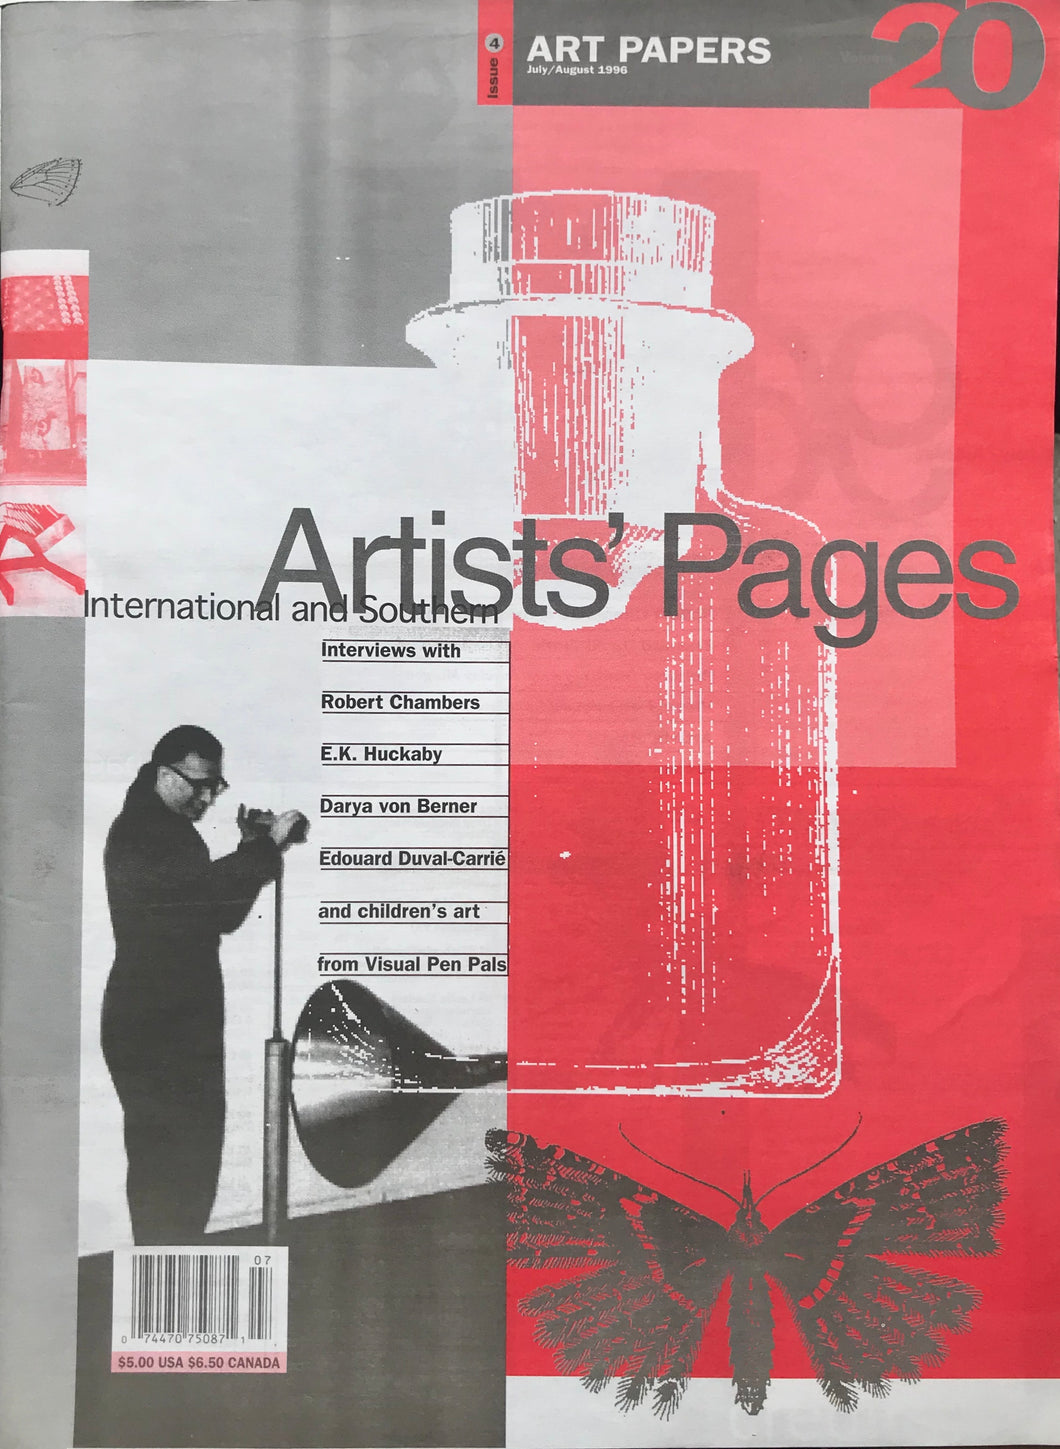 ART PAPERS 20.04 - July/Aug 1996 - SOLD OUT